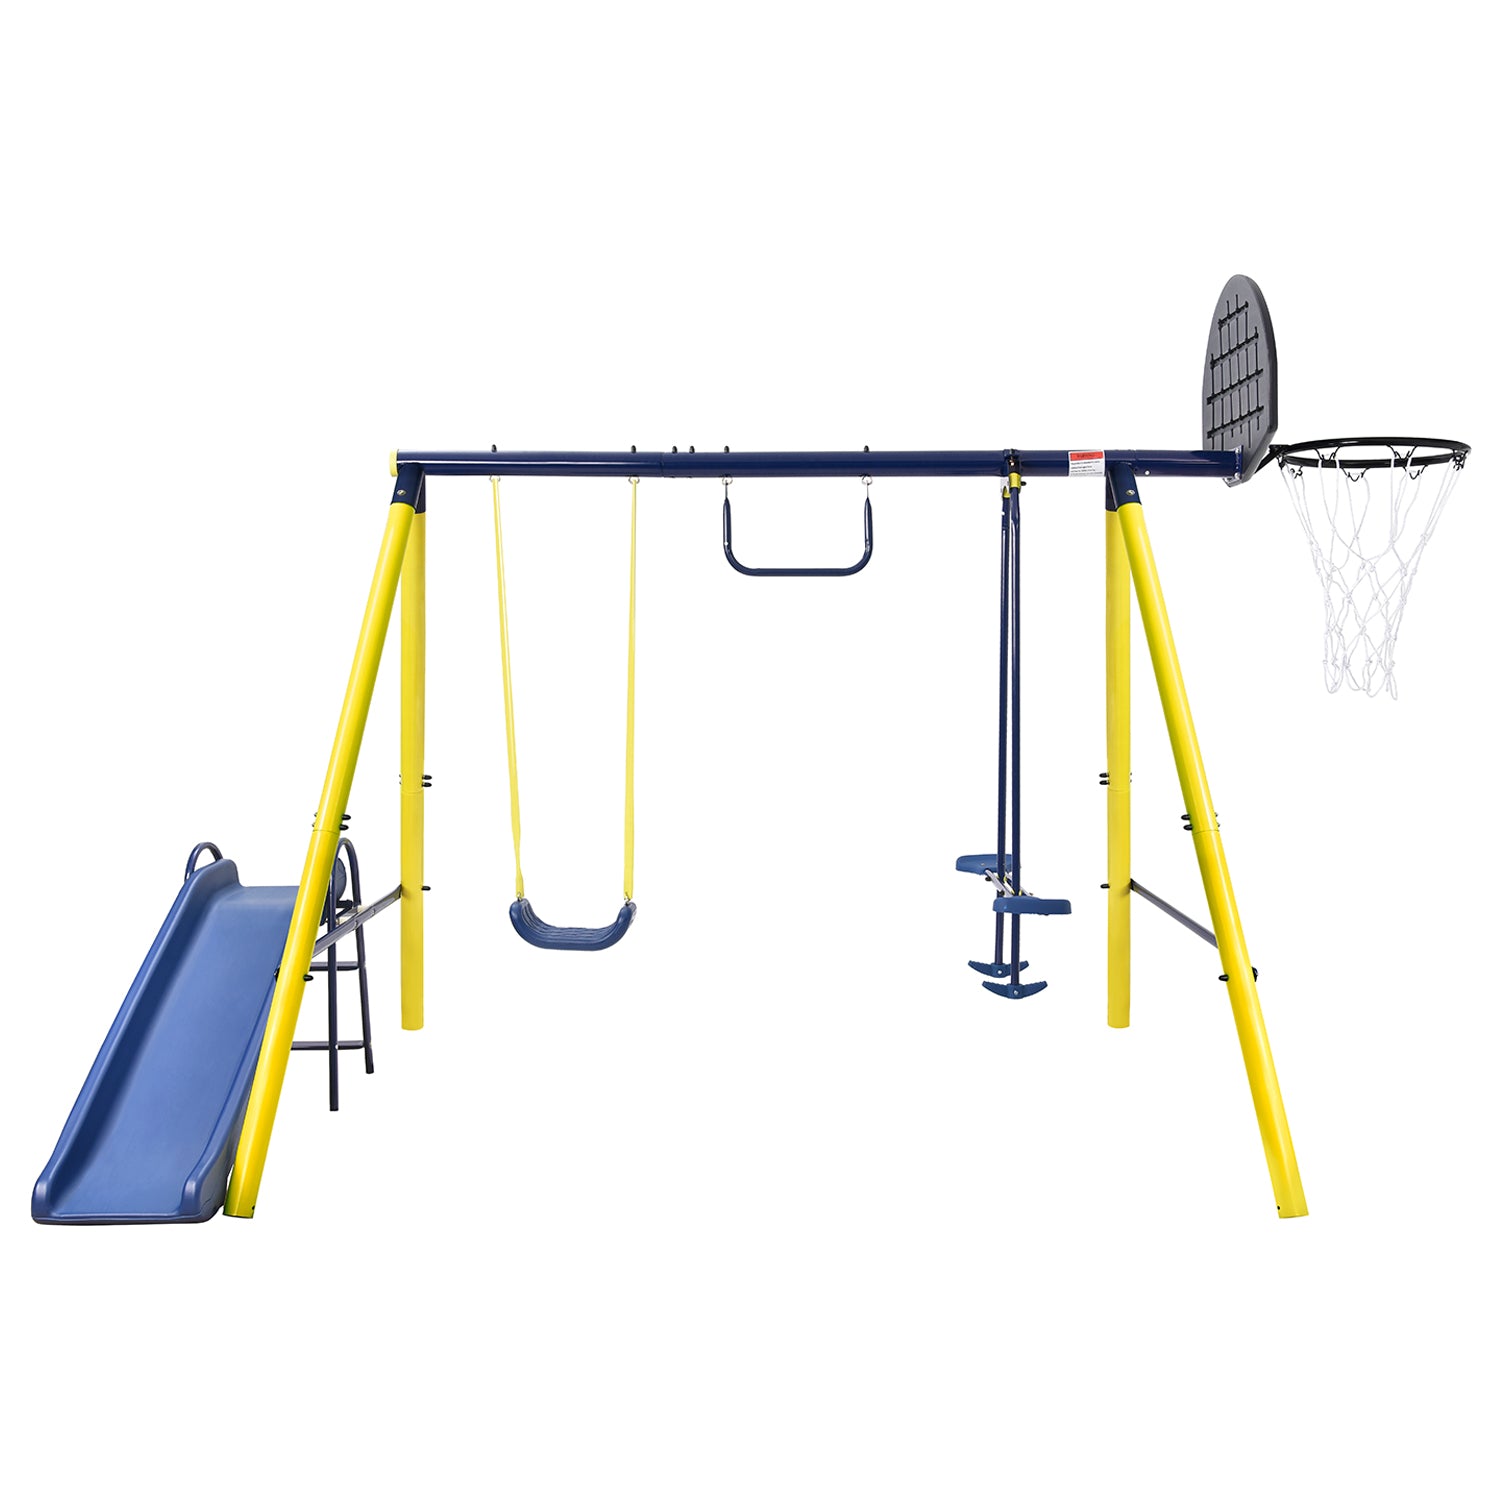 5 in 1 Outdoor Toddler Swing Set with Steel Frame-Boyel Living